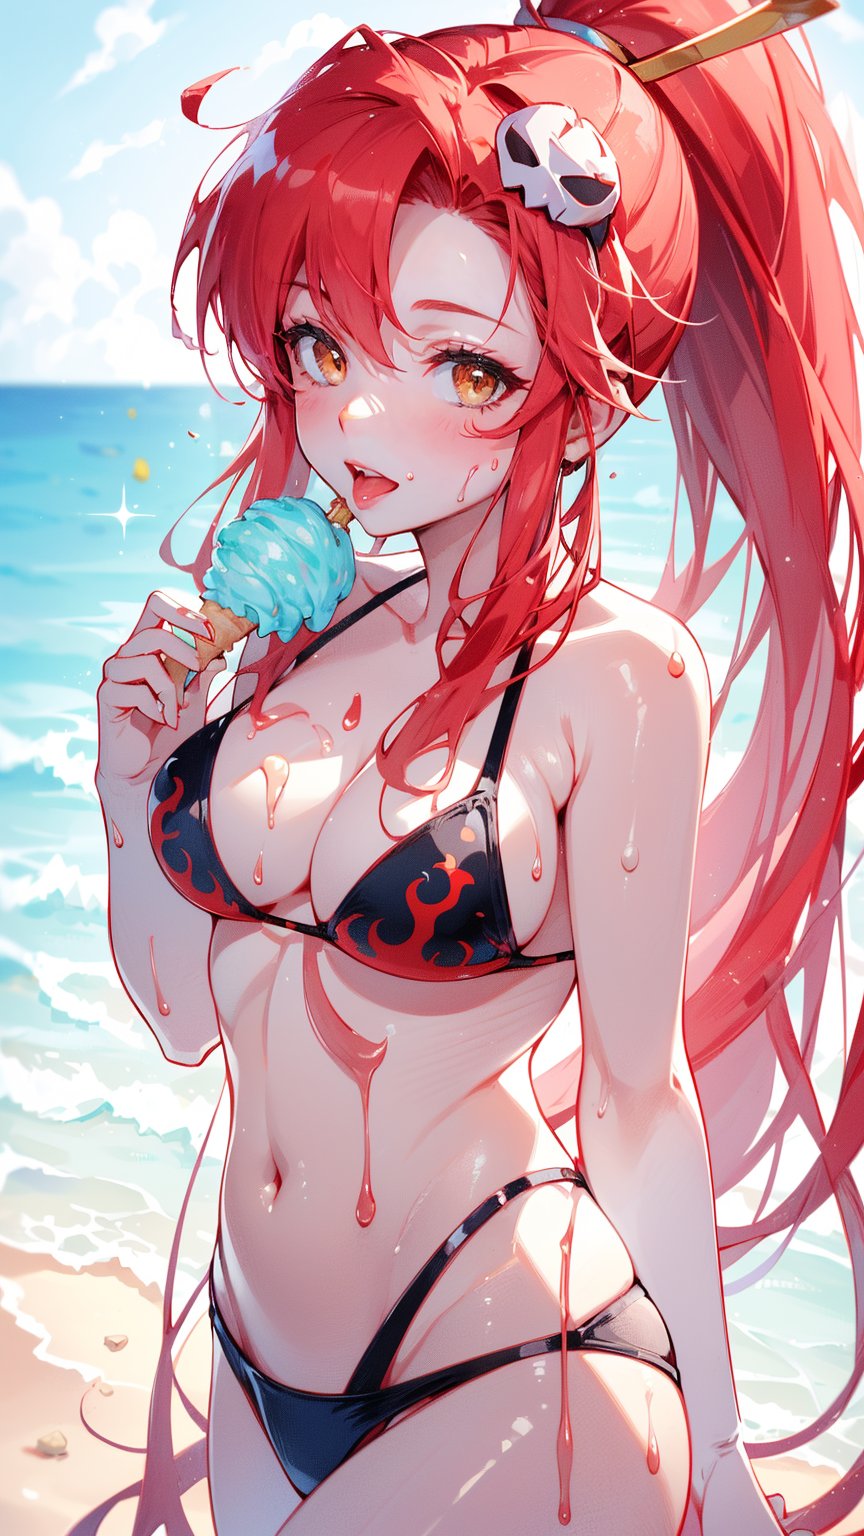 (1 girl), (yellow eyes), (red long hair), (ponytail hairstyle), (White Cute Little Skull Headpiece), (happy smile), ((eating soft serve ice cream with tongue)), ((sexy design bikini)), ultra high resolution, 8k, Hdr, daytime, in the beach, (sweat all over the face)